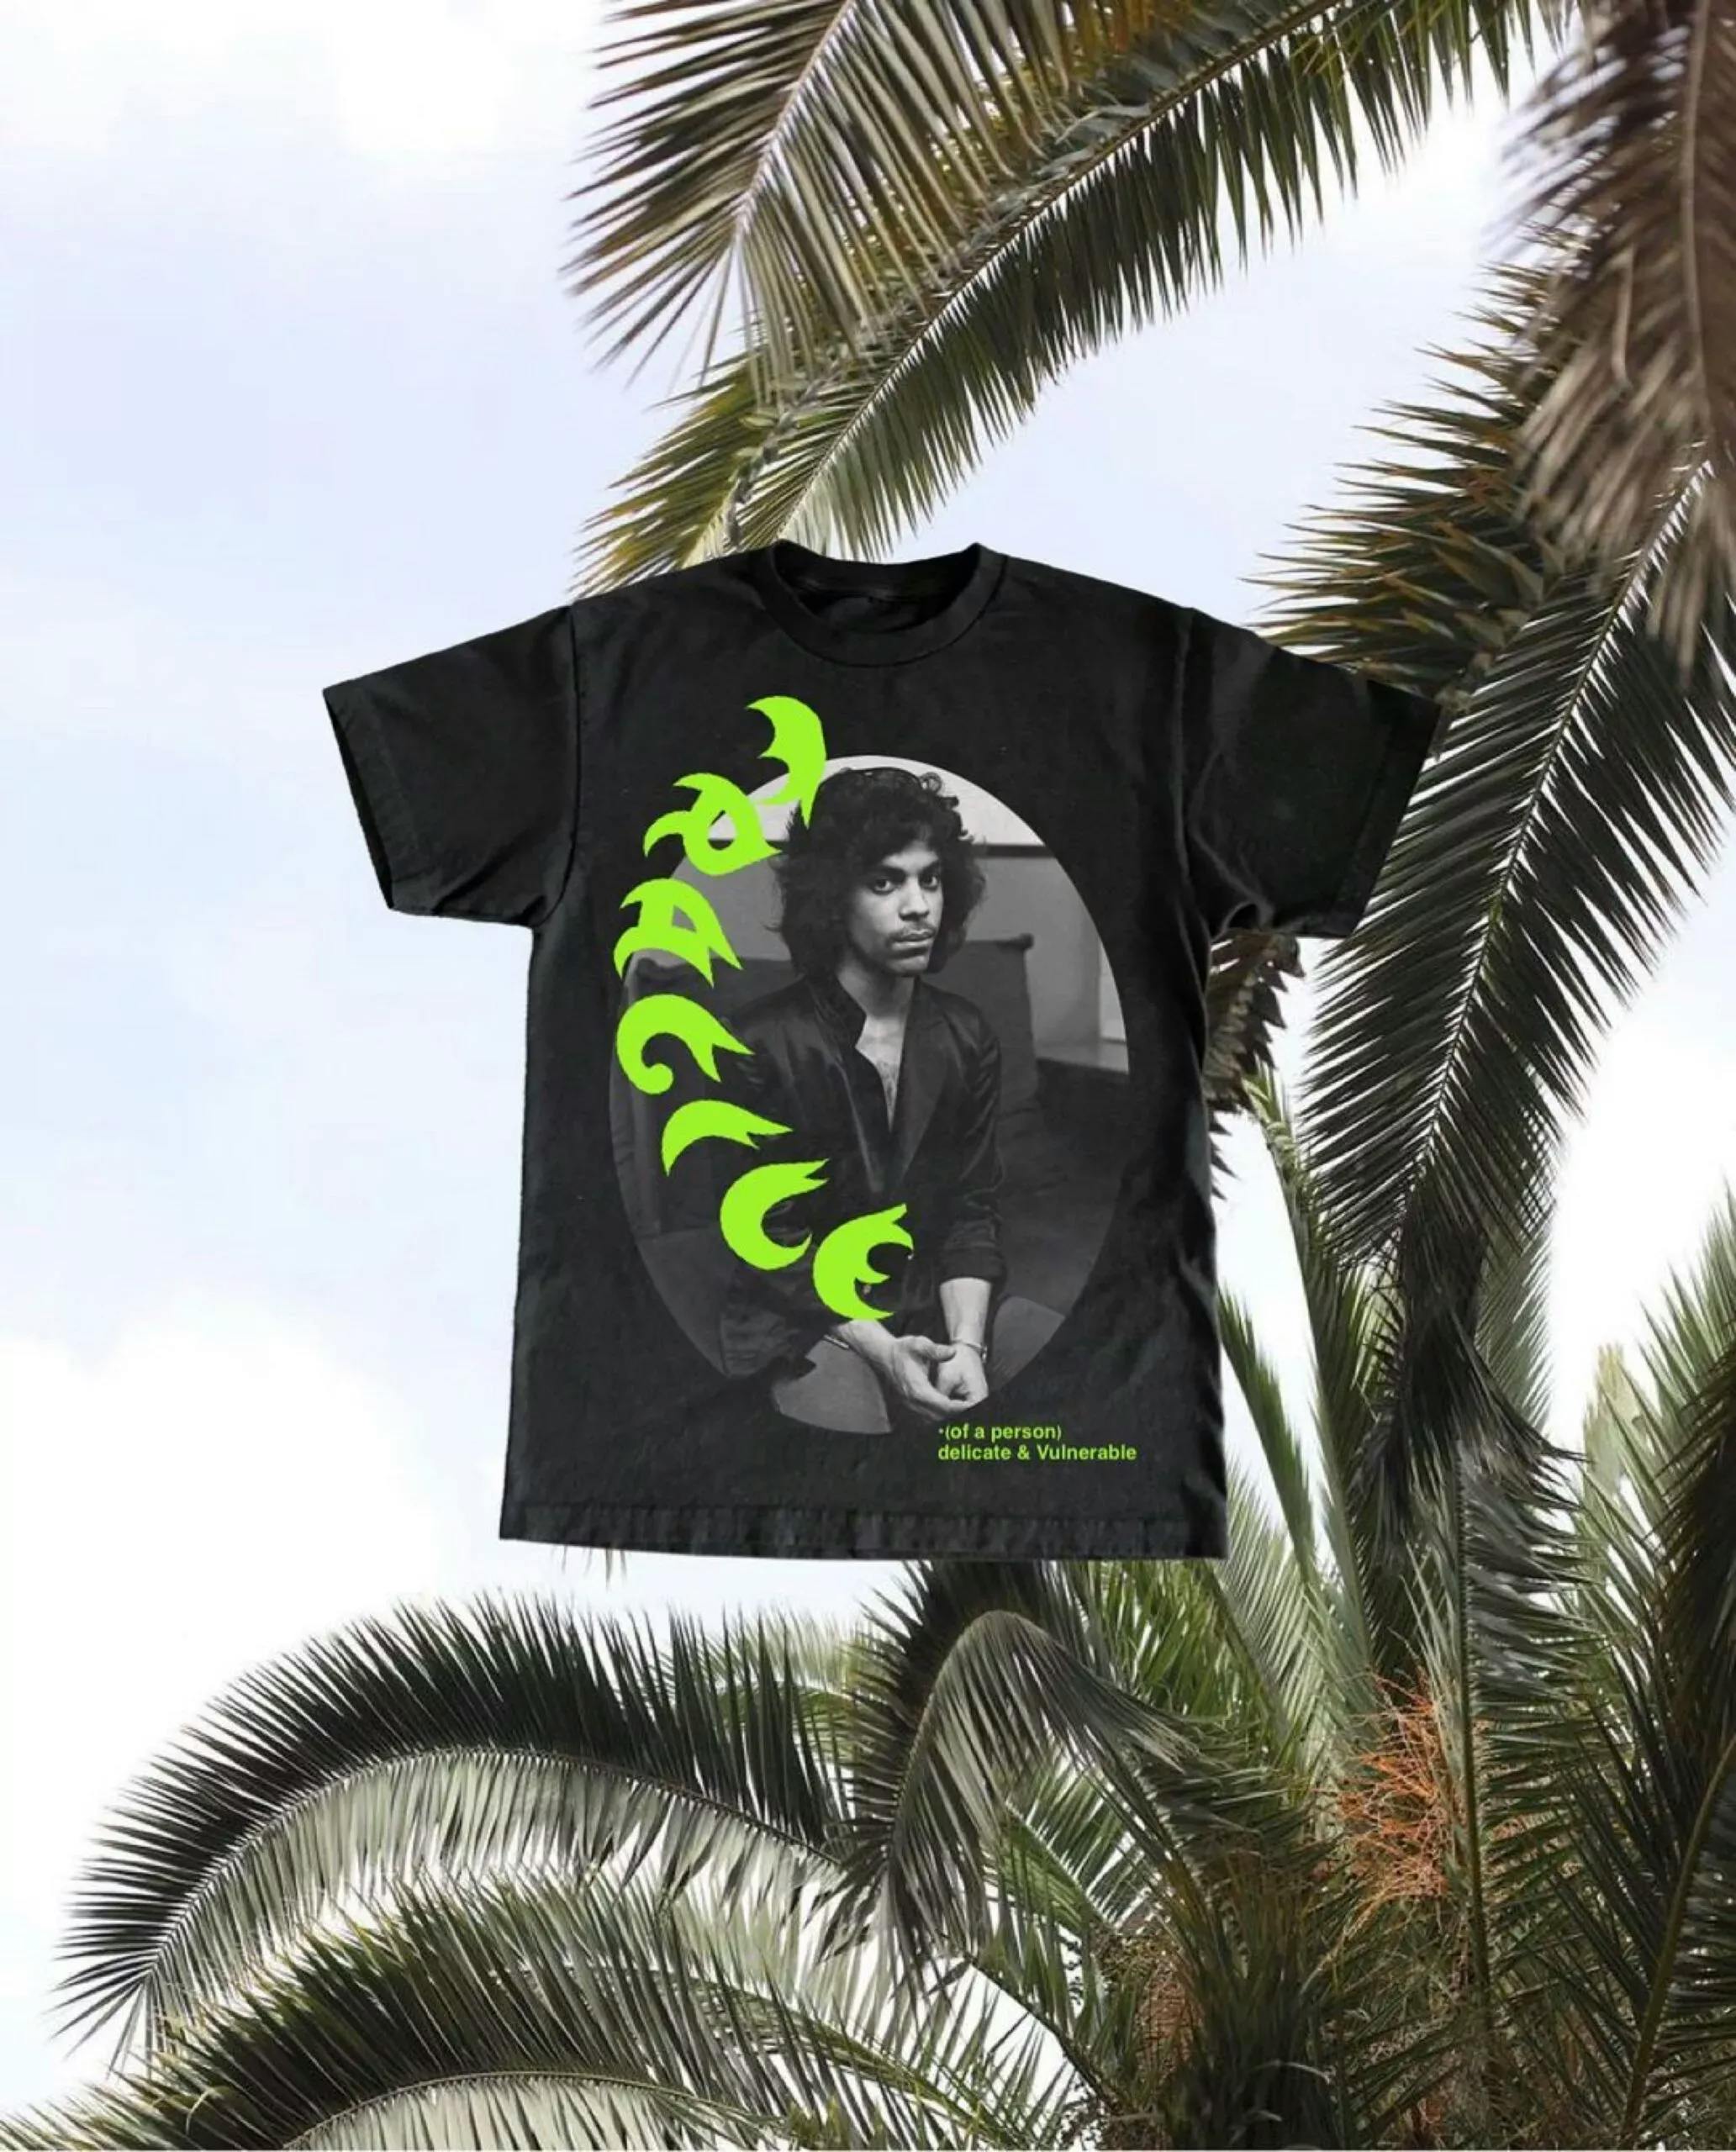 T-shirt with singer Prince on it and green text